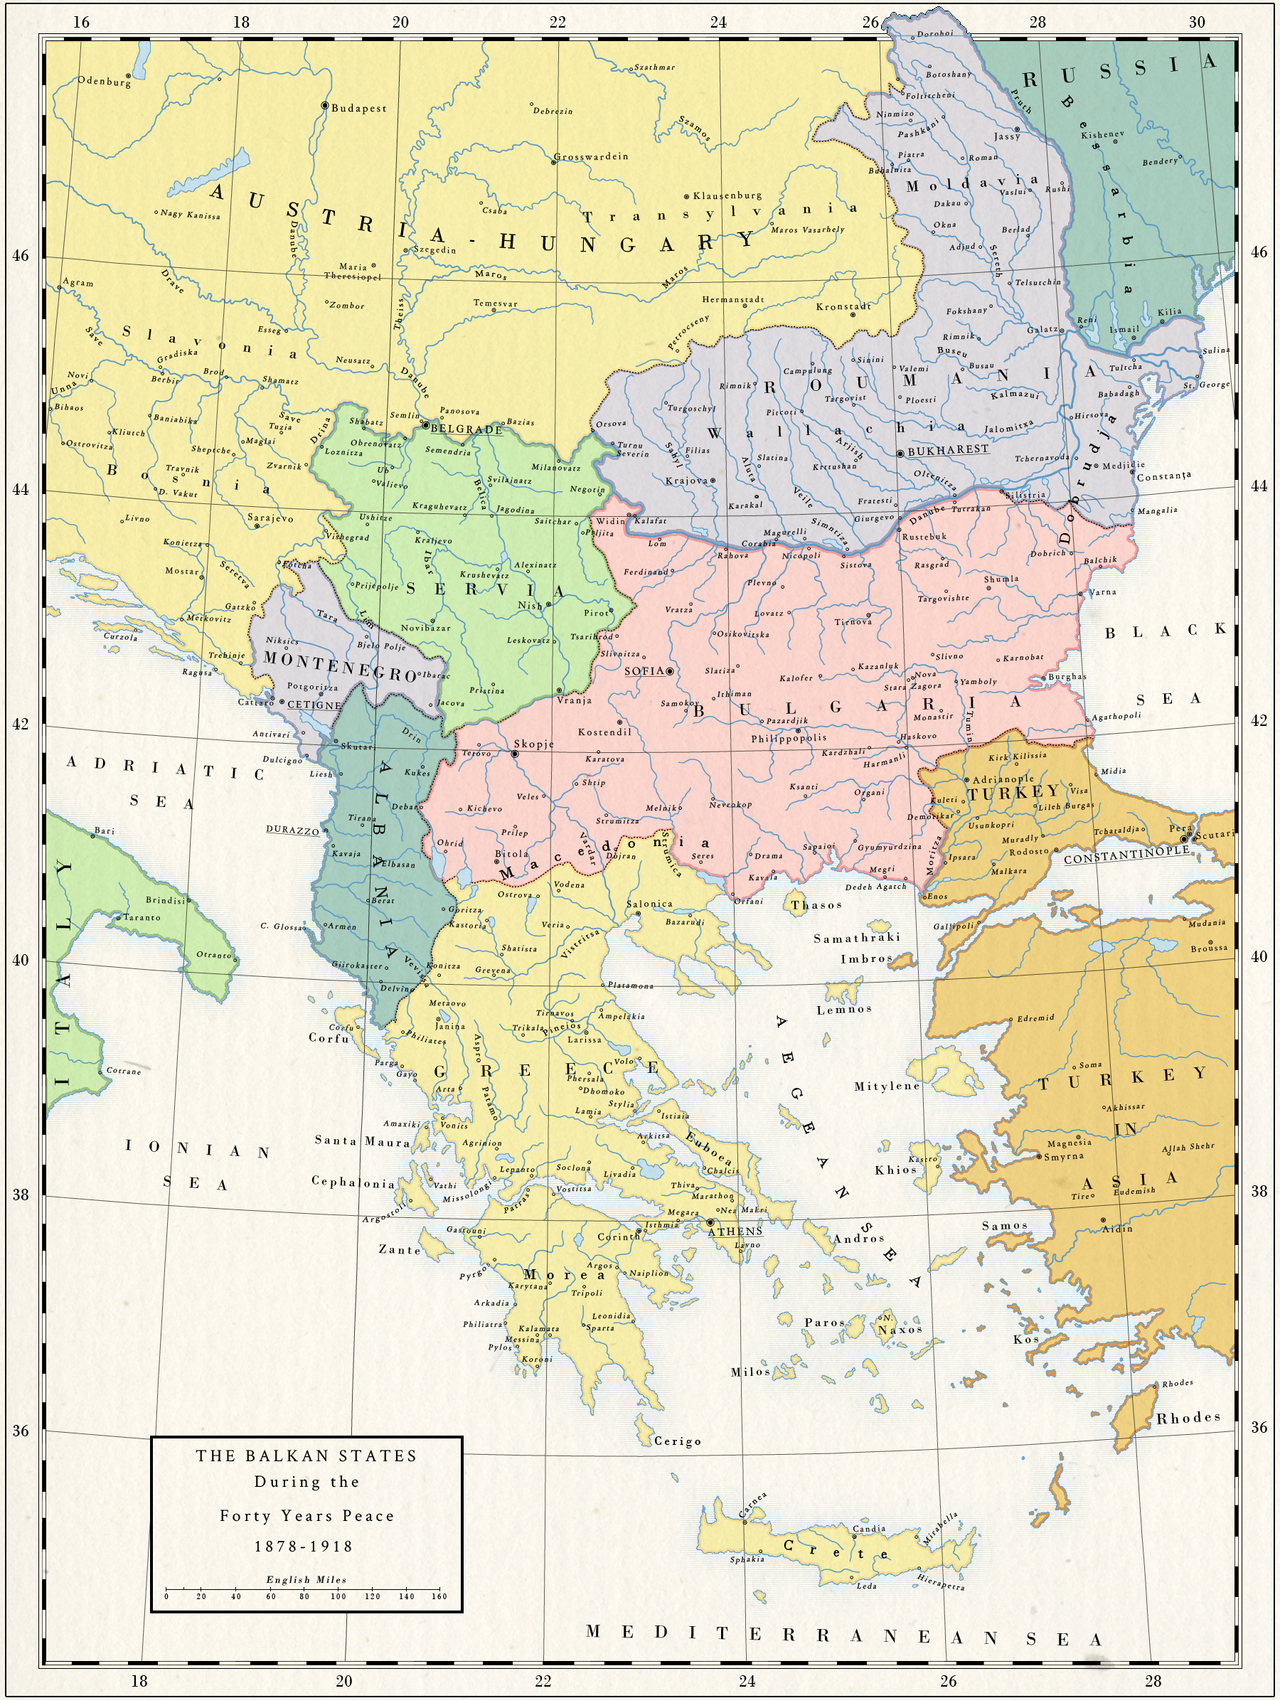 prussia_of_the_balkans_by_toixstory-d8wrsks.png